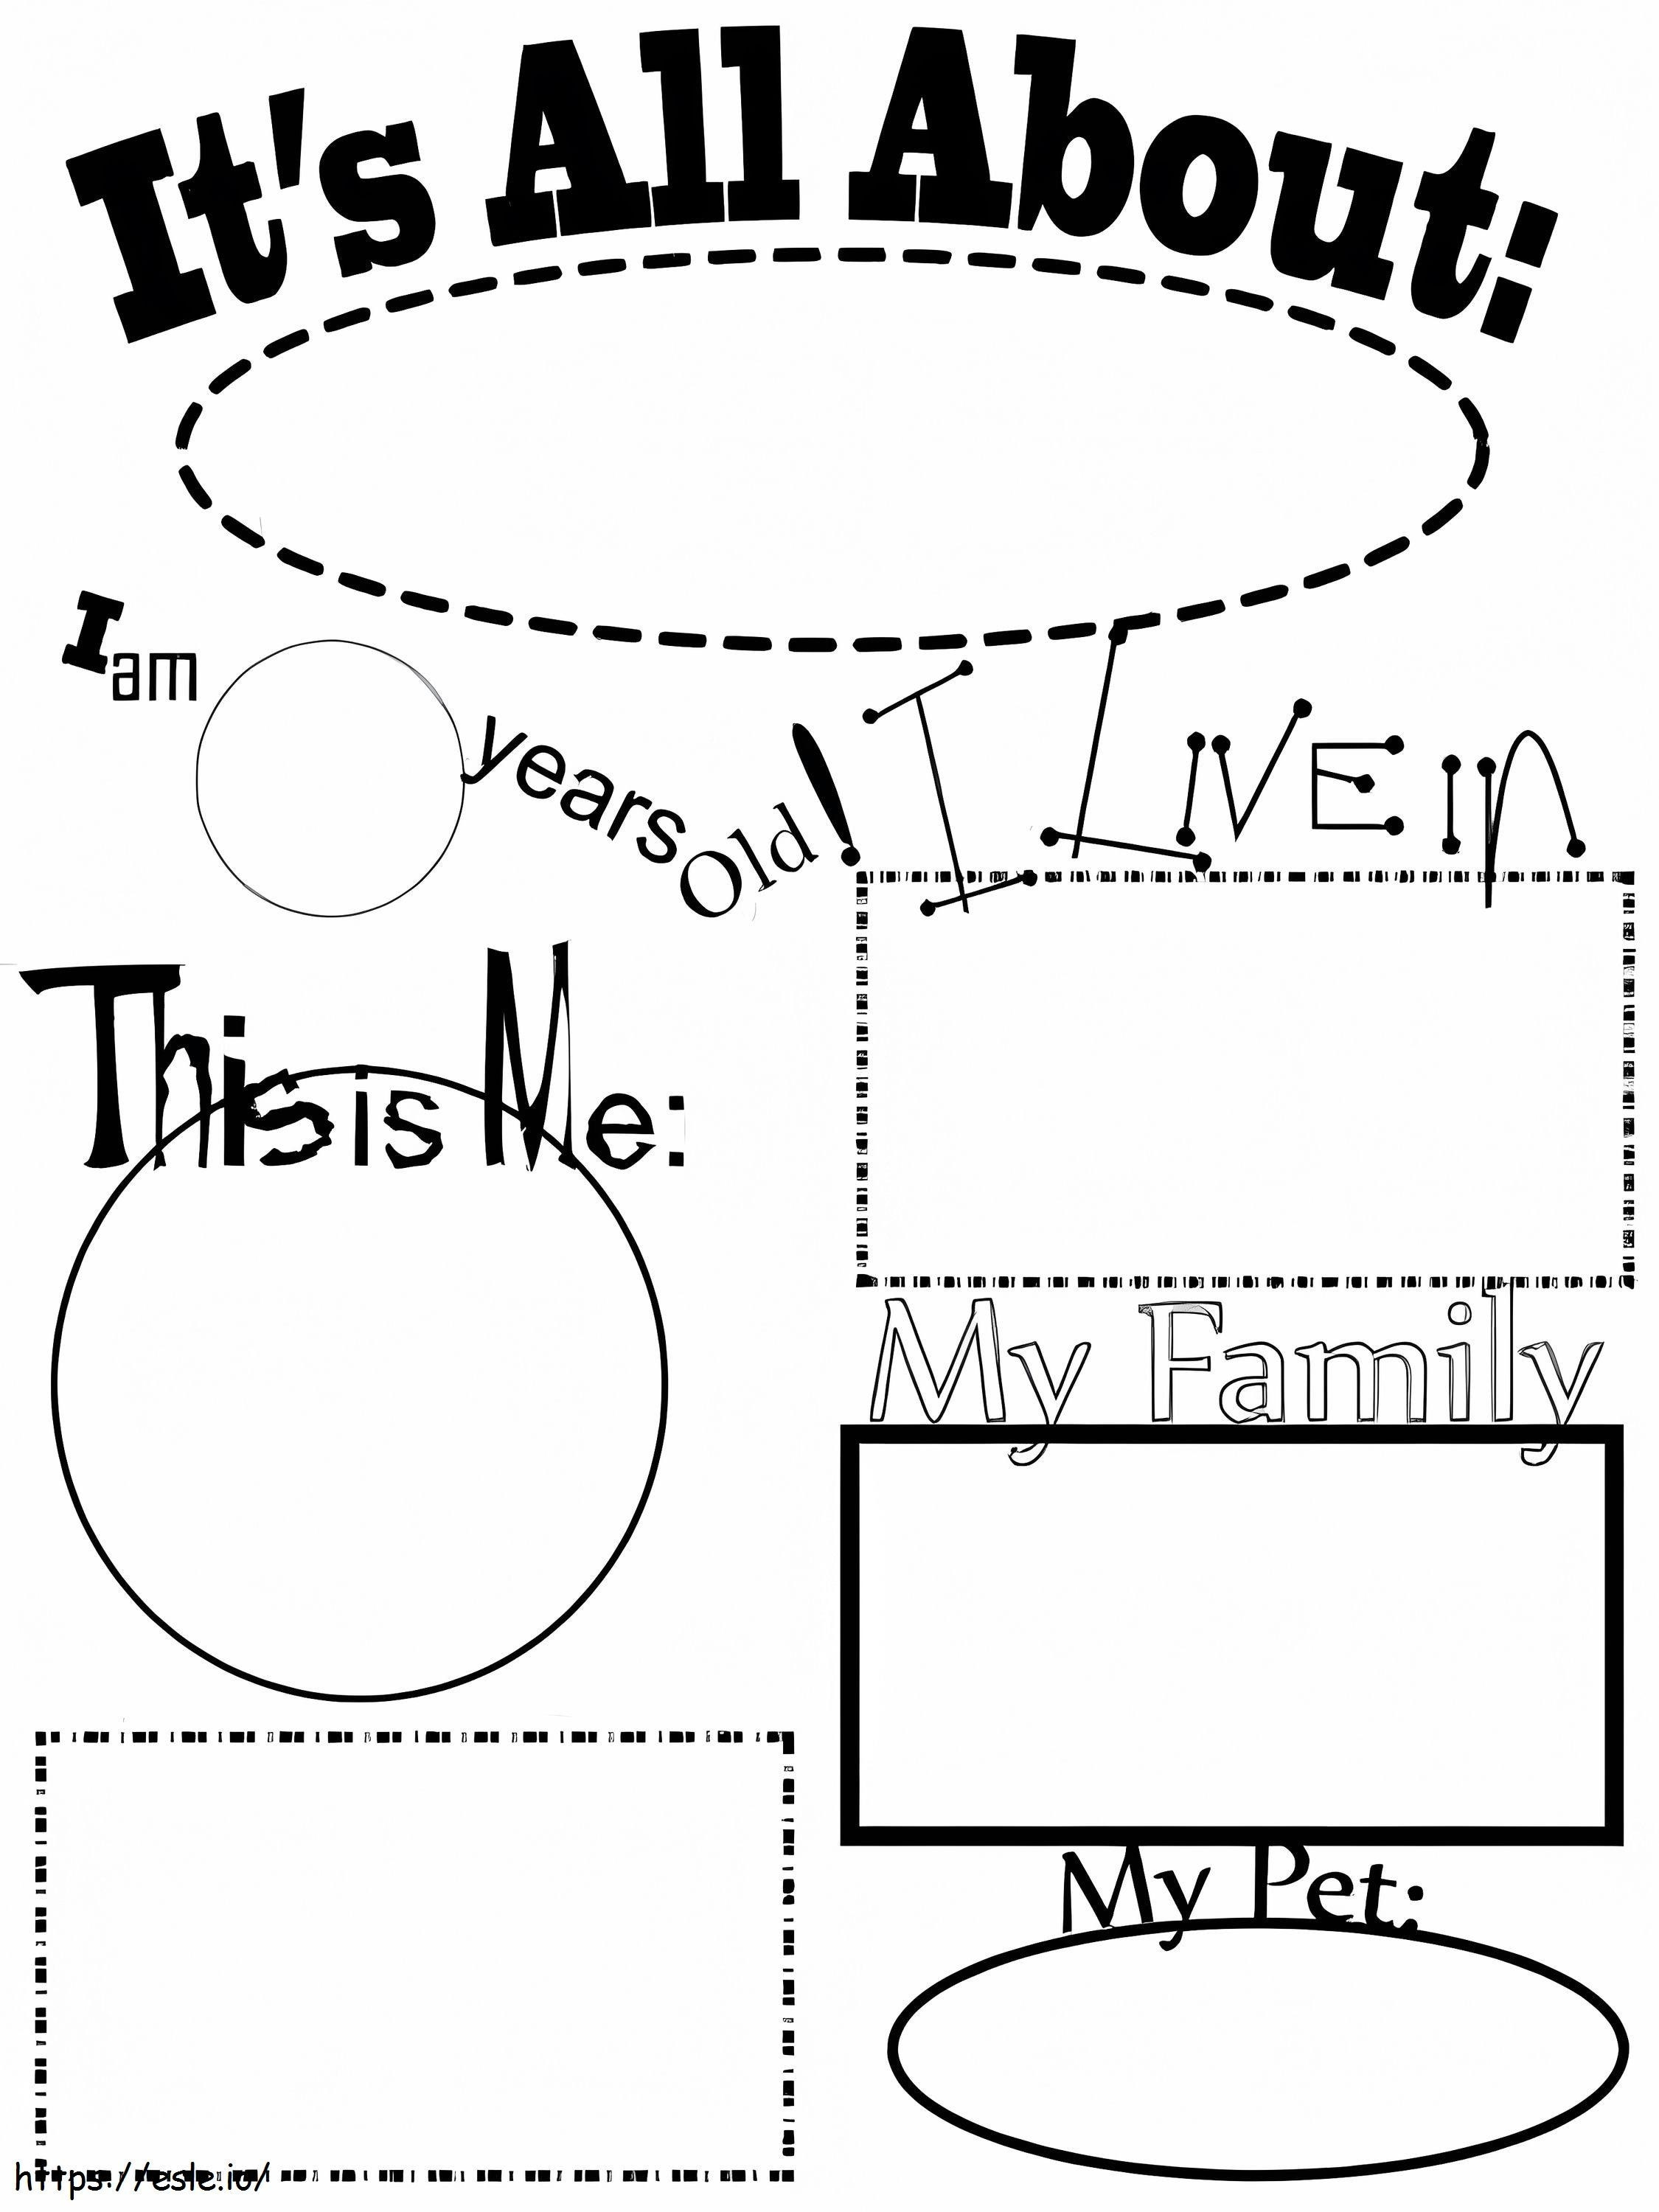 All About Me 2 coloring page